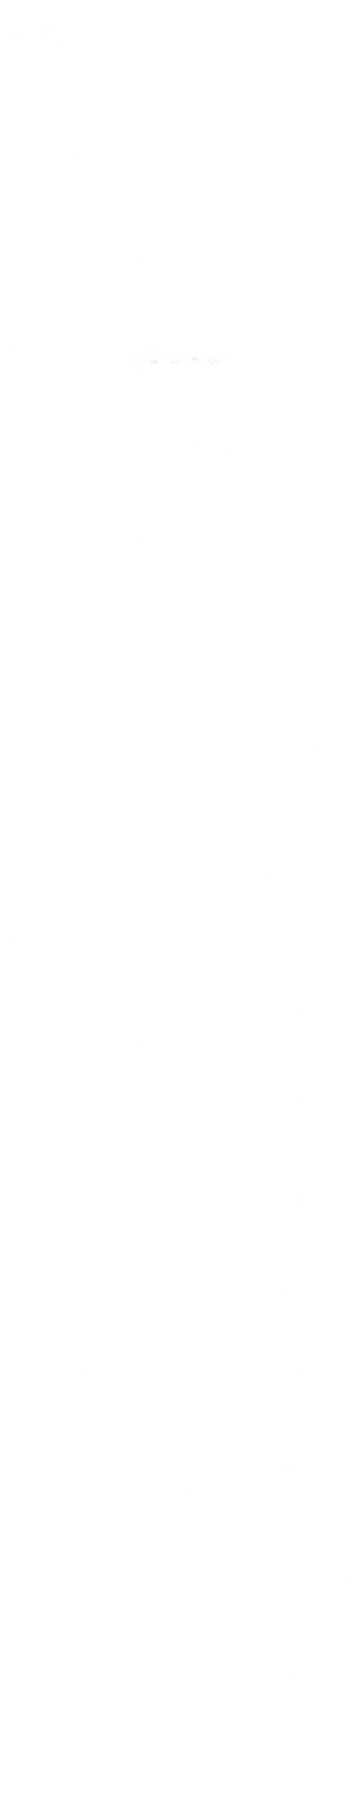 Signatures of the rest of the Crispin team